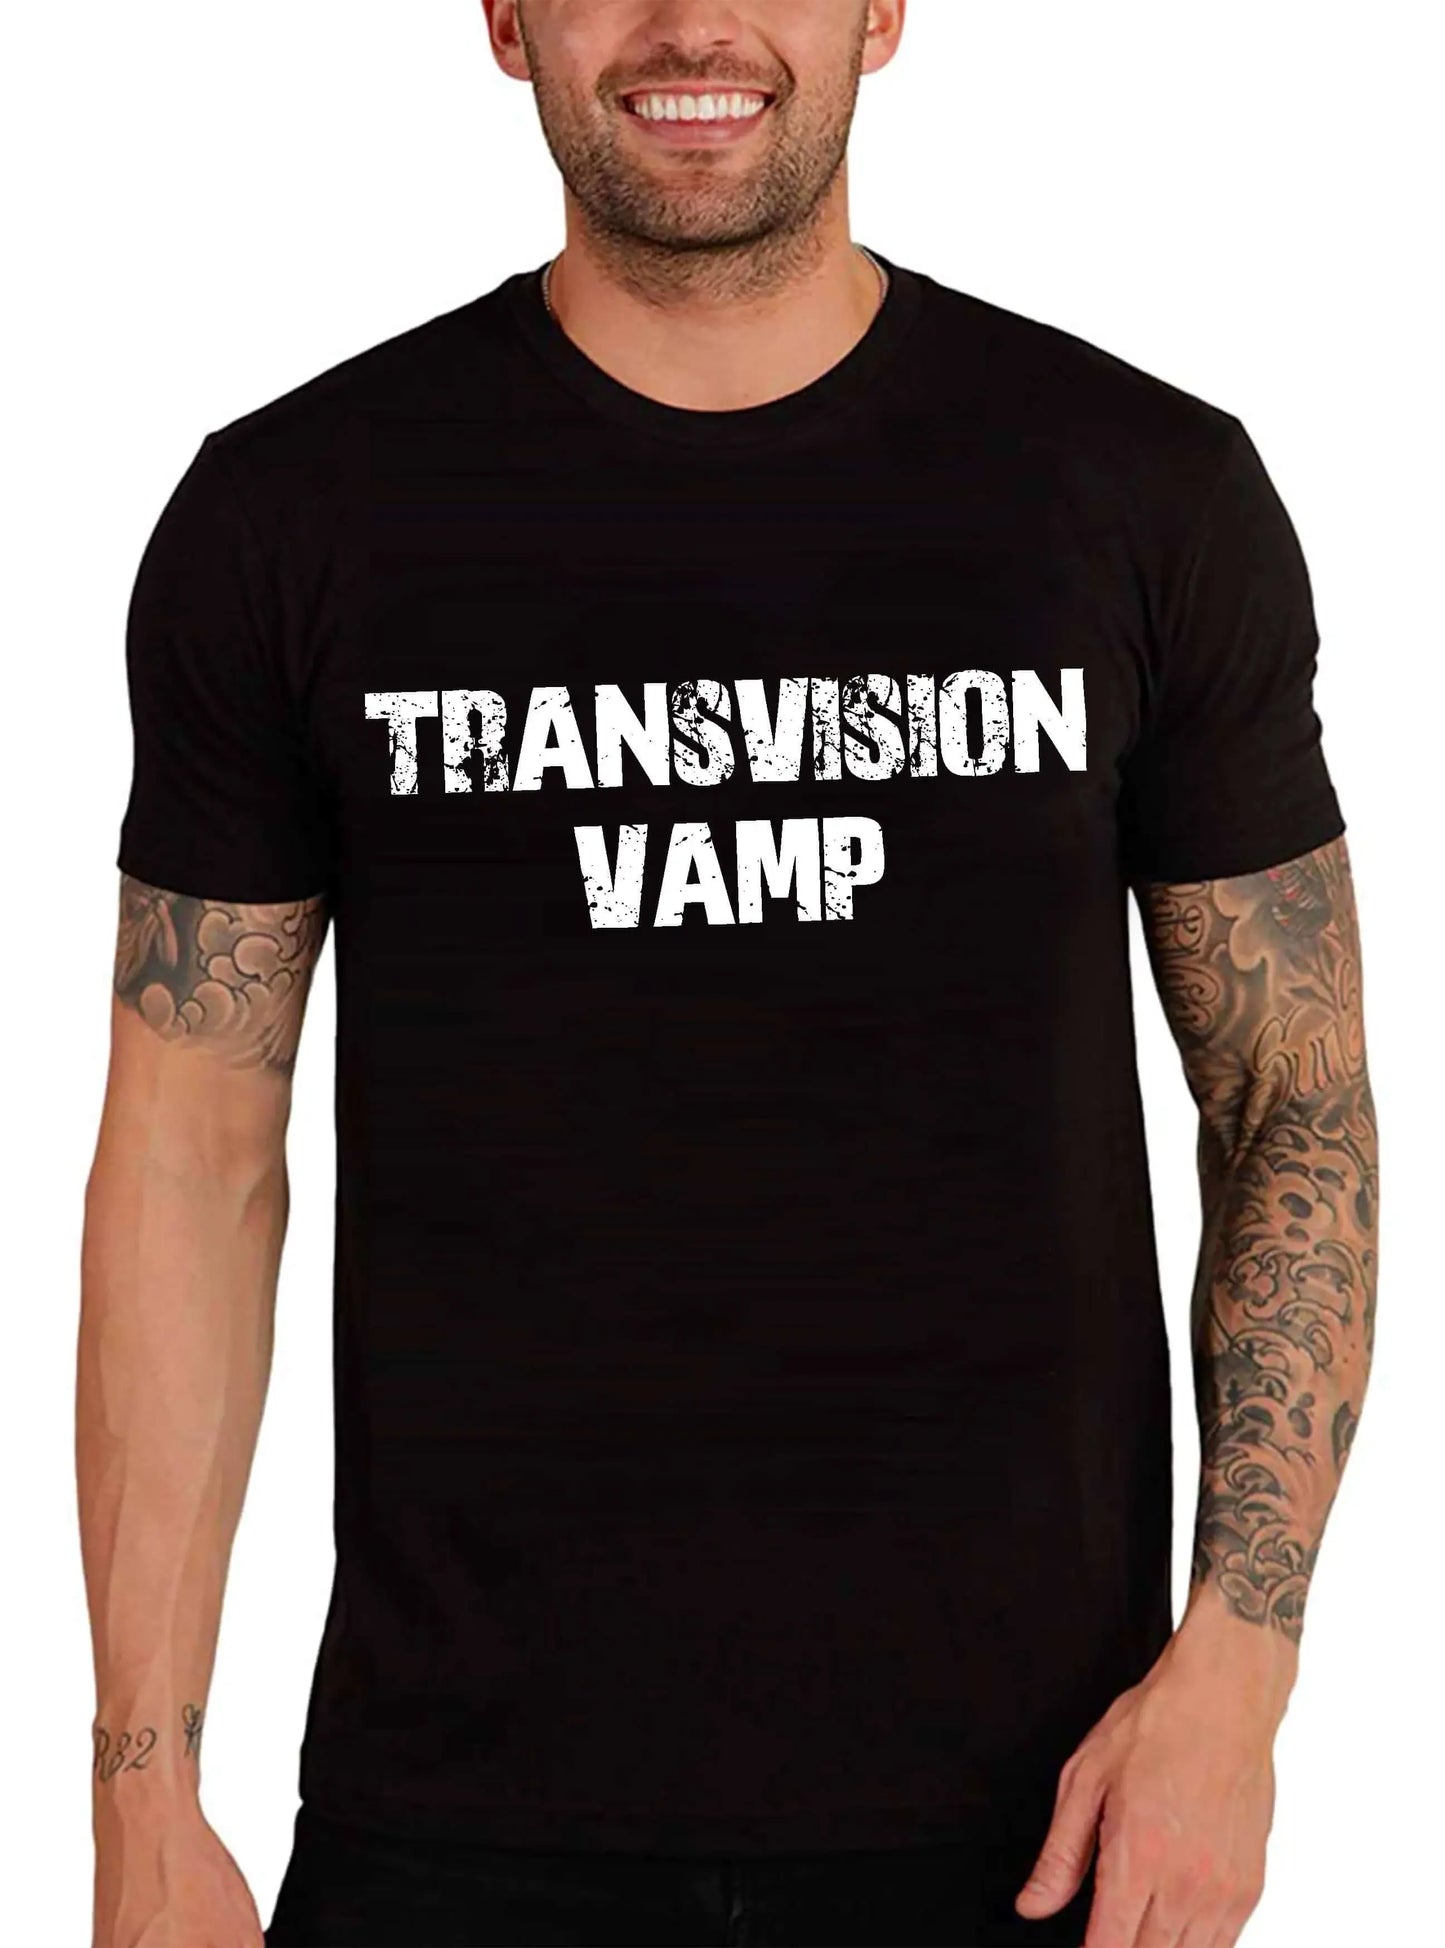 Men's Graphic T-Shirt Transvision Vamp Eco-Friendly Limited Edition Short Sleeve Tee-Shirt Vintage Birthday Gift Novelty